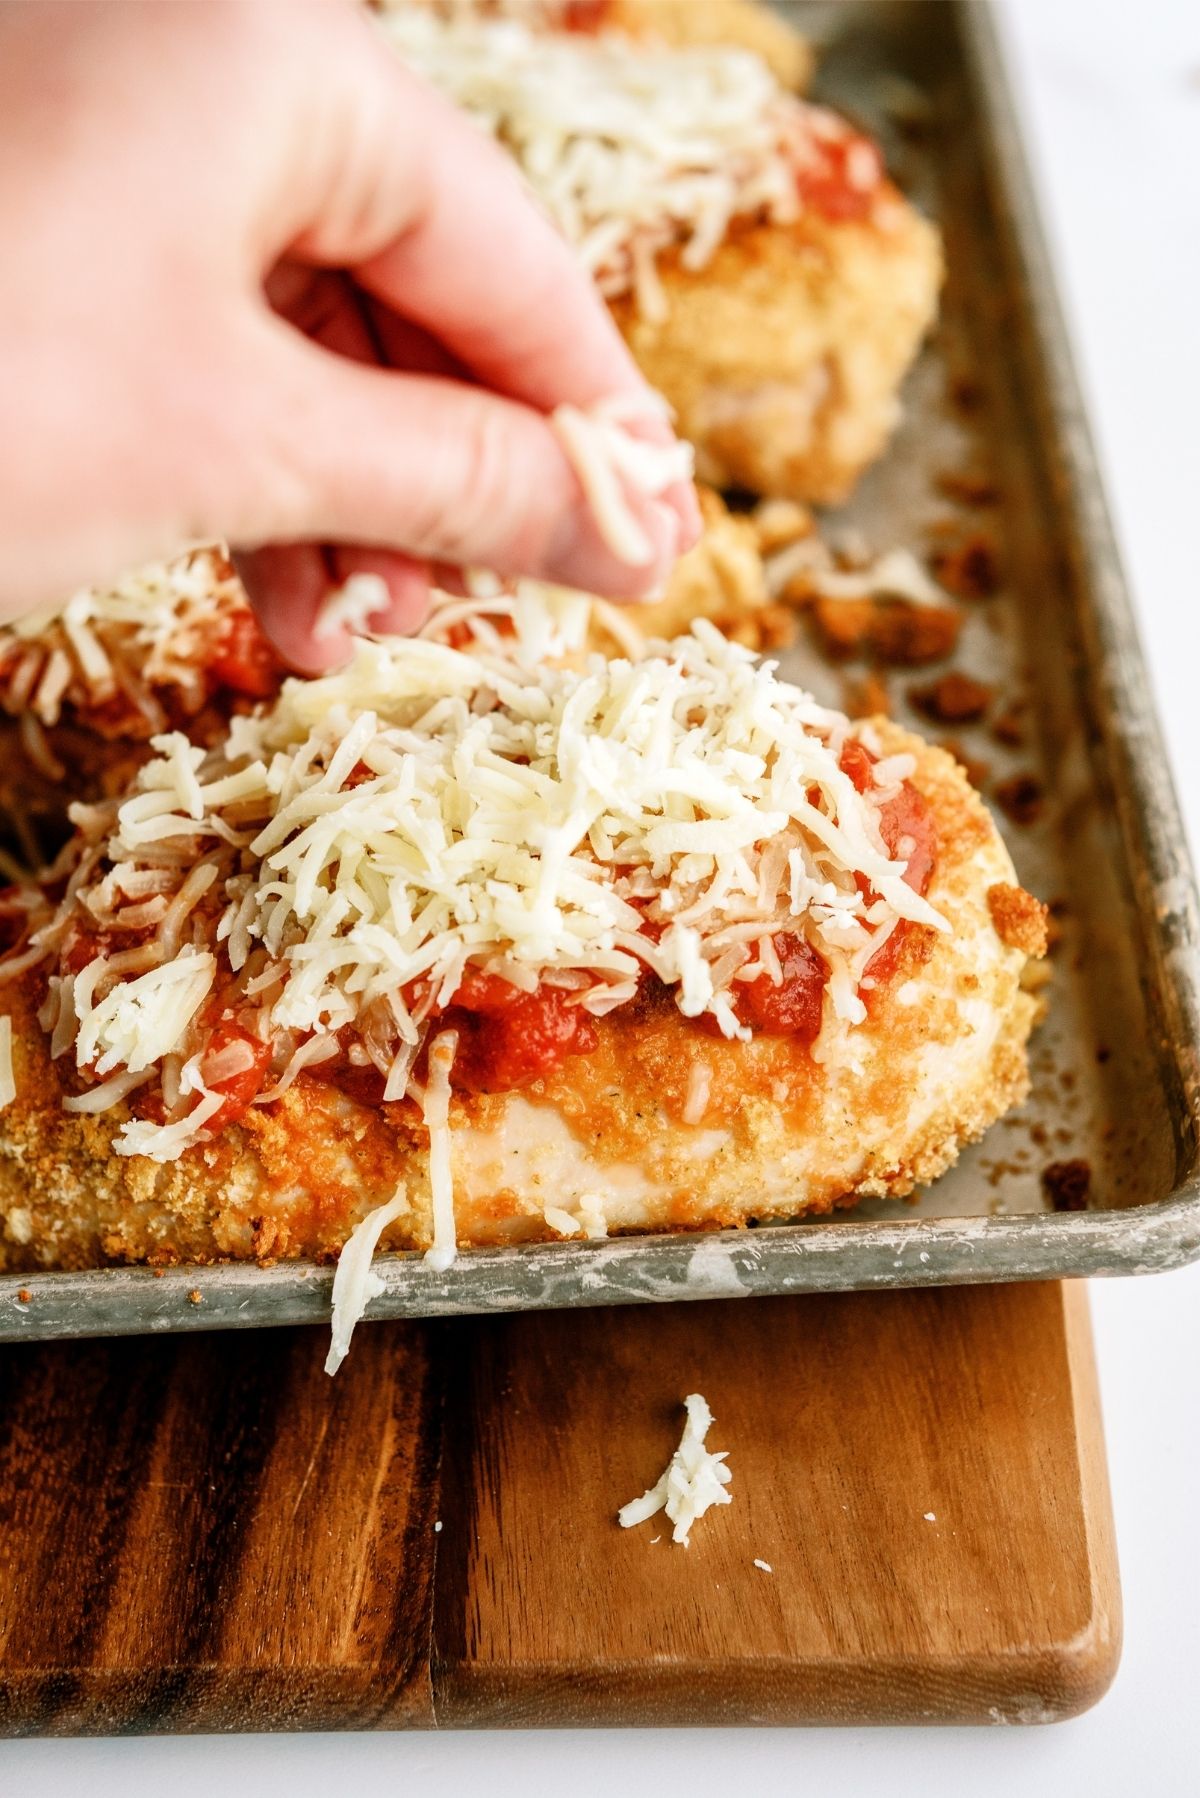 Putting cheese on top of Baked Crispy Chicken Parmesan